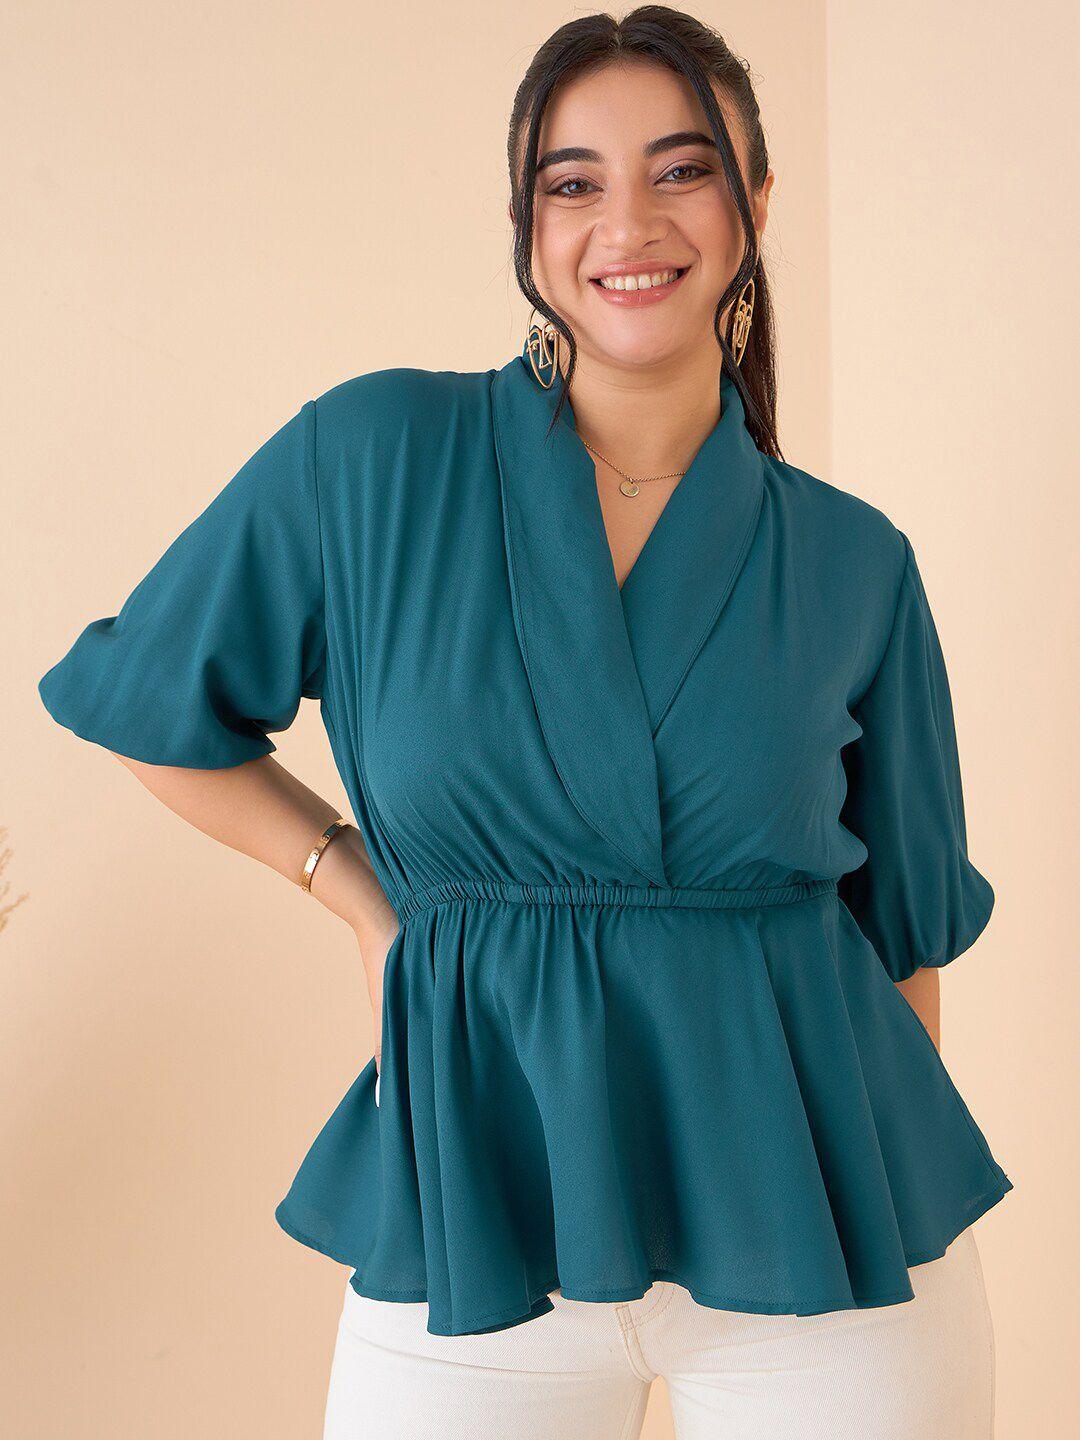 curve-by-kassually-teal-green-v-neck-puff-sleeves-wrap-top